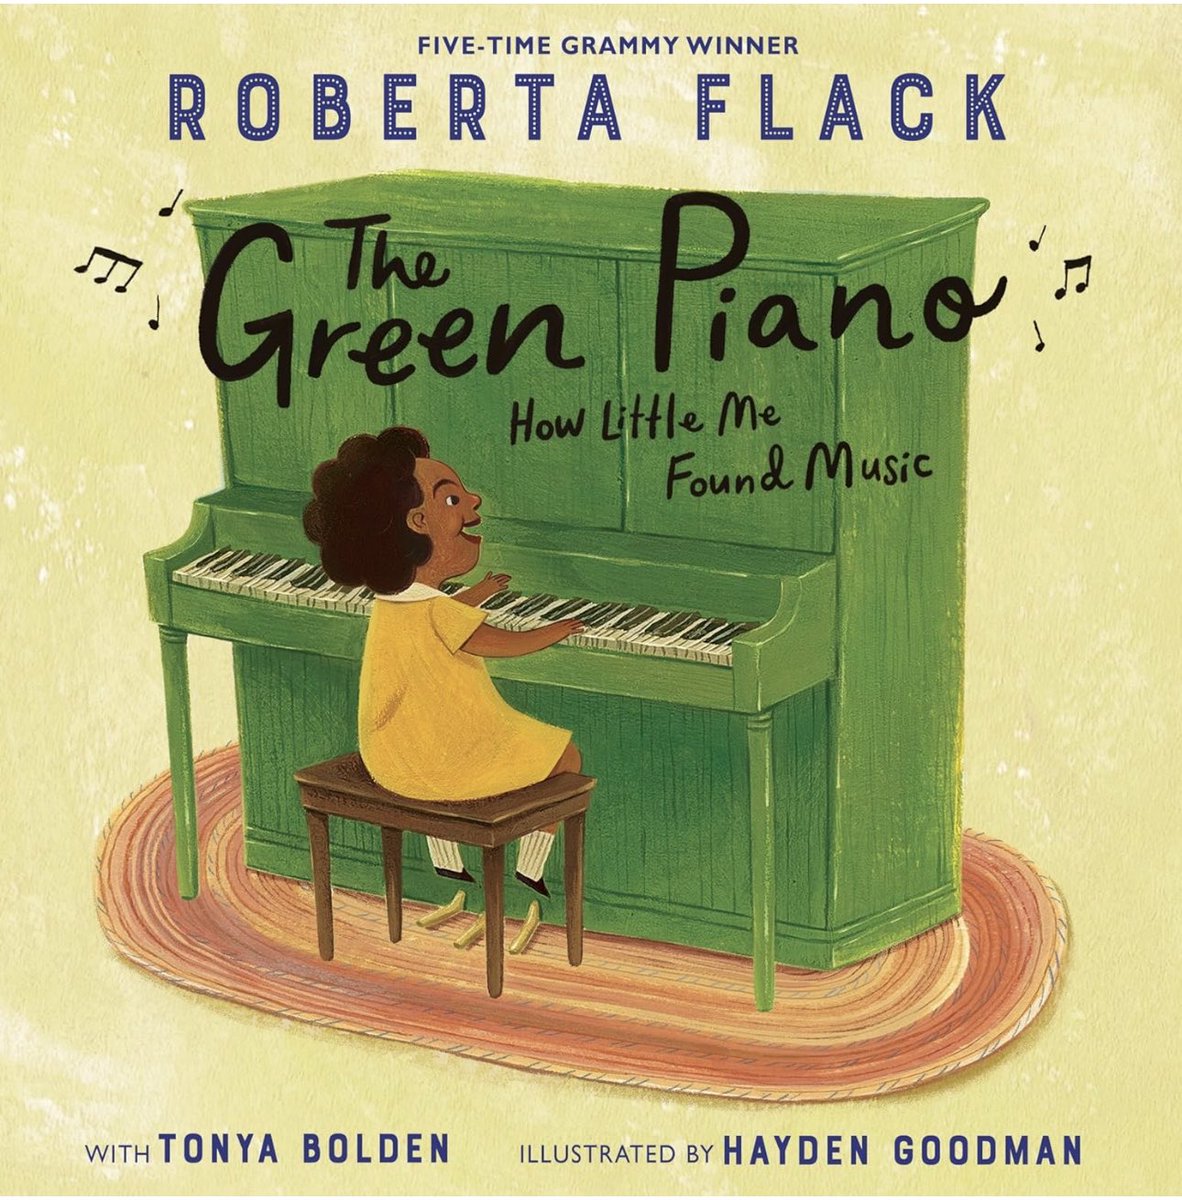 The Green Piano How Little Me Found Music by Tonya Bolden illustrated by Hayden Goodman is the autobiography of Five-Time Grammy Winner Roberta Flack #WomensHistoryMonth #BlackHistoryMonth #PictureBooks #Reading #MusicHistory